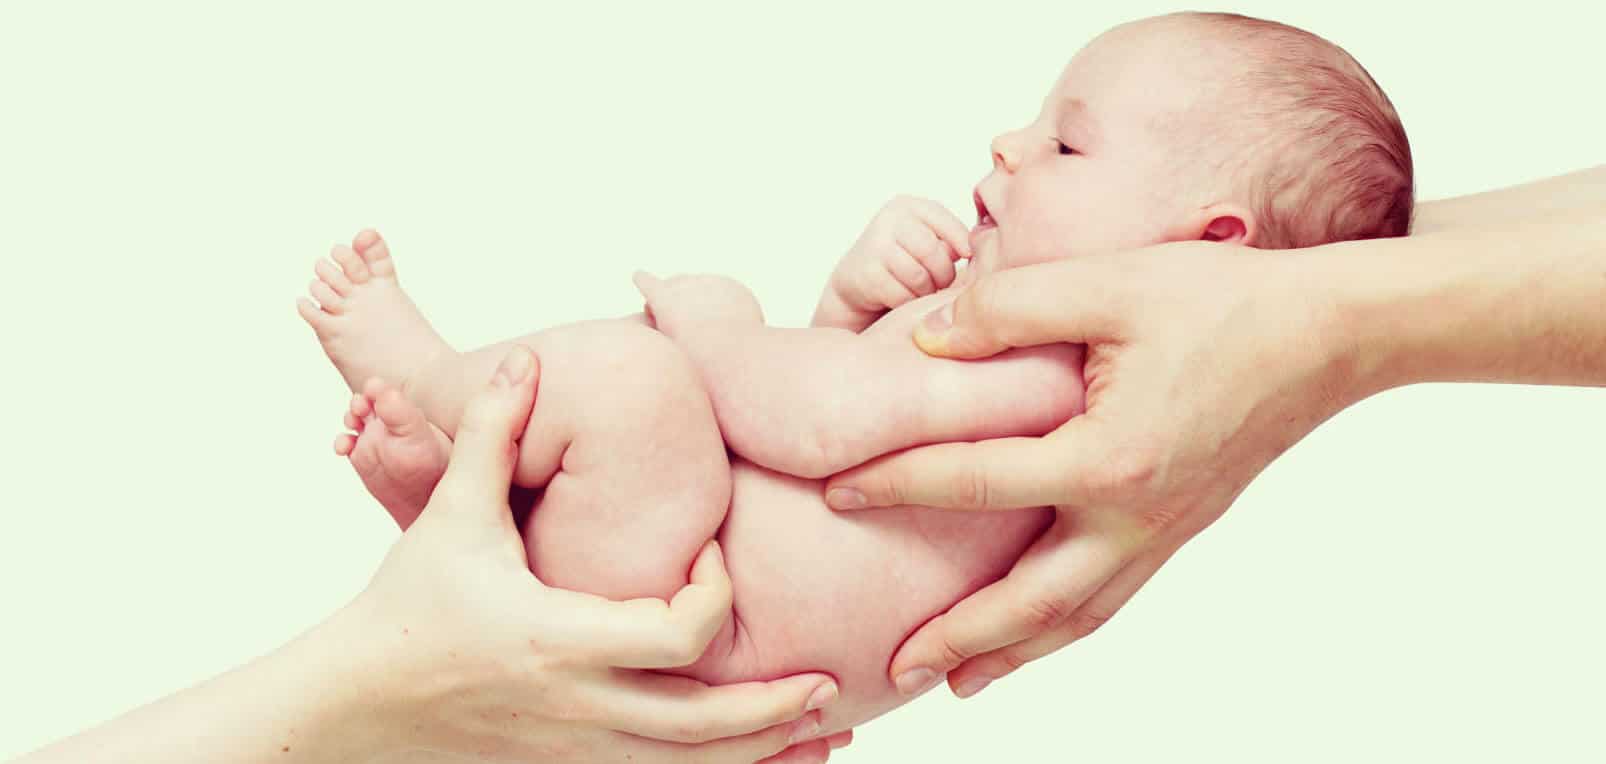 Services Within The Scope Of IVF